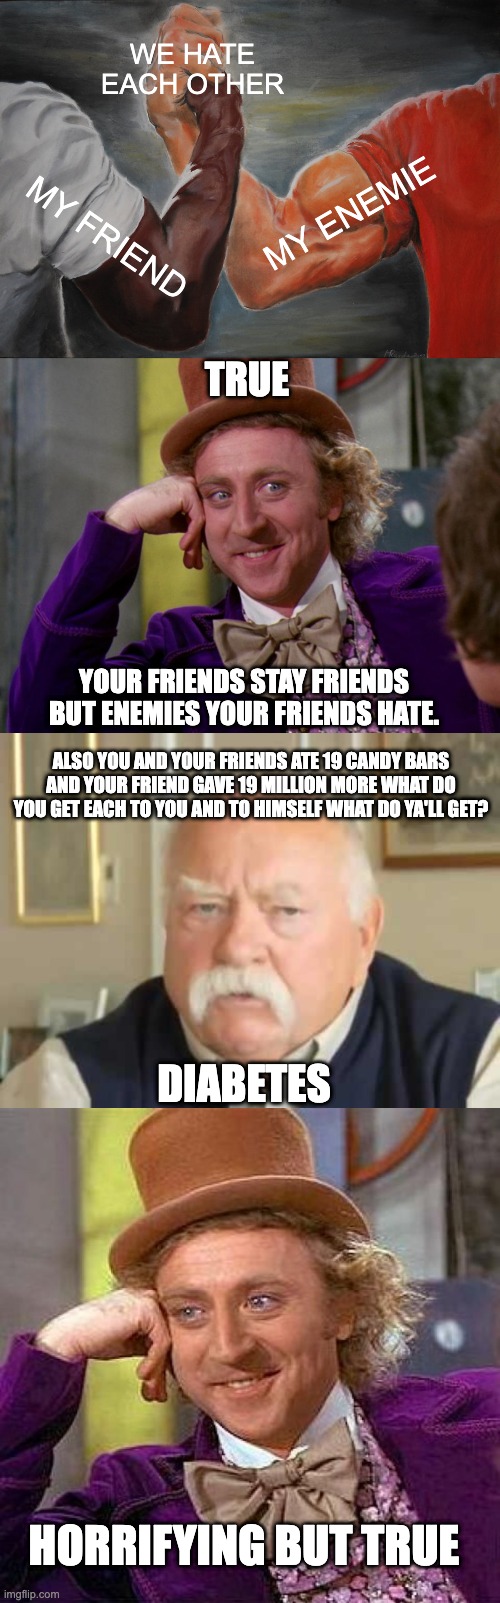 HORRIFYING FACTS |  WE HATE EACH OTHER; MY ENEMIE; MY FRIEND; TRUE; YOUR FRIENDS STAY FRIENDS BUT ENEMIES YOUR FRIENDS HATE. ALSO YOU AND YOUR FRIENDS ATE 19 CANDY BARS AND YOUR FRIEND GAVE 19 MILLION MORE WHAT DO YOU GET EACH TO YOU AND TO HIMSELF WHAT DO YA'LL GET? DIABETES; HORRIFYING BUT TRUE | image tagged in memes,epic handshake,charlie-chocolate-factory,diabetes,creepy condescending wonka | made w/ Imgflip meme maker